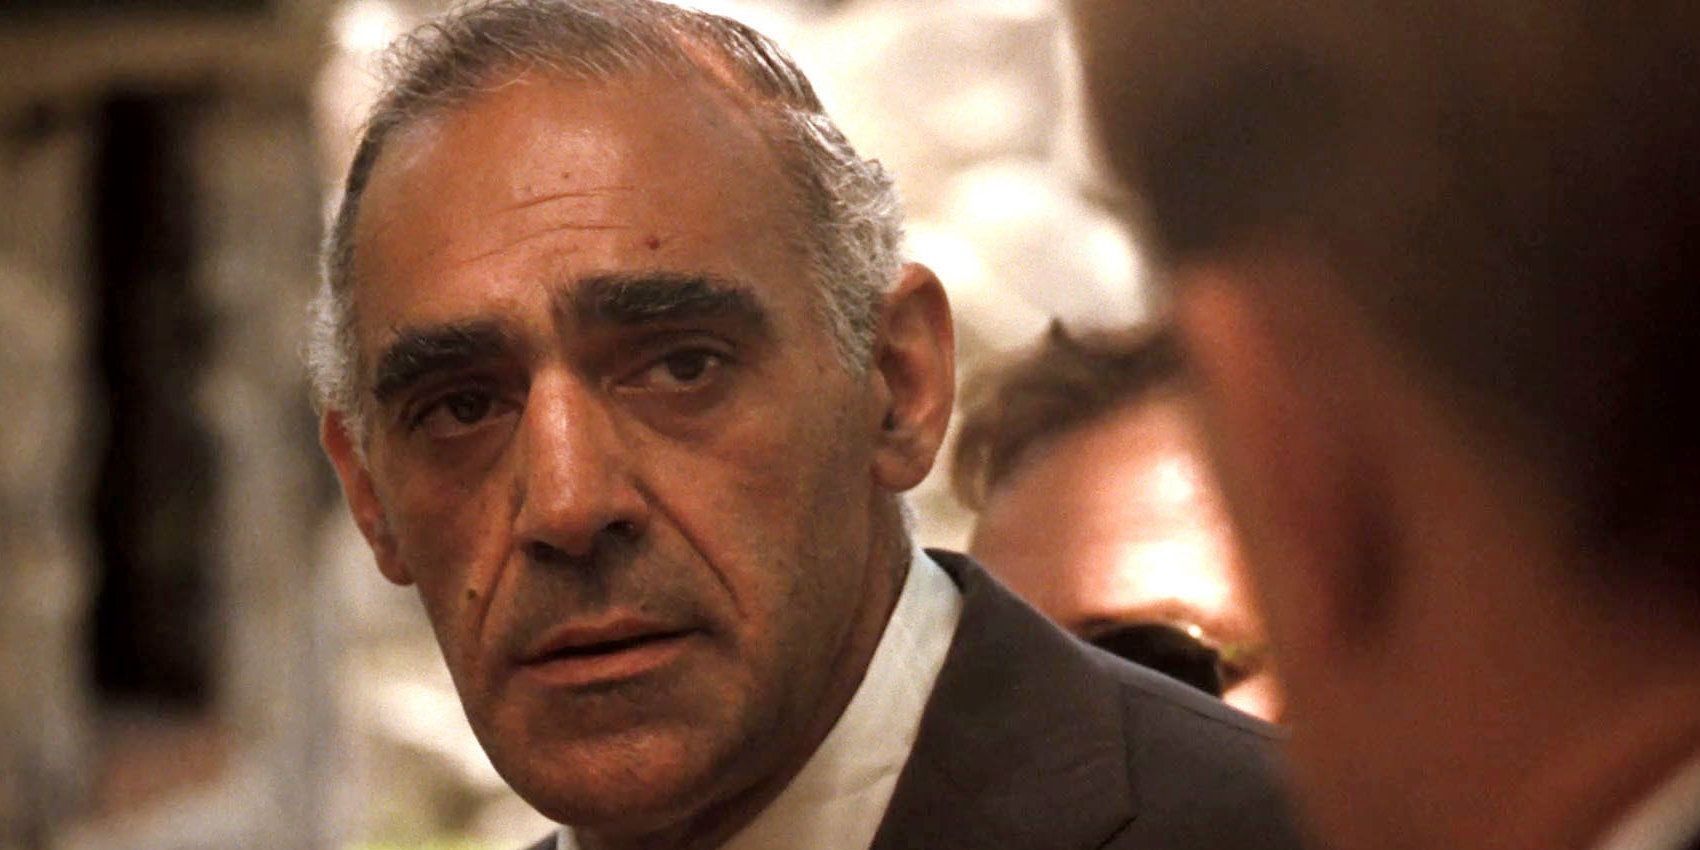 Tessio attends Vito's funeral in The Godfather